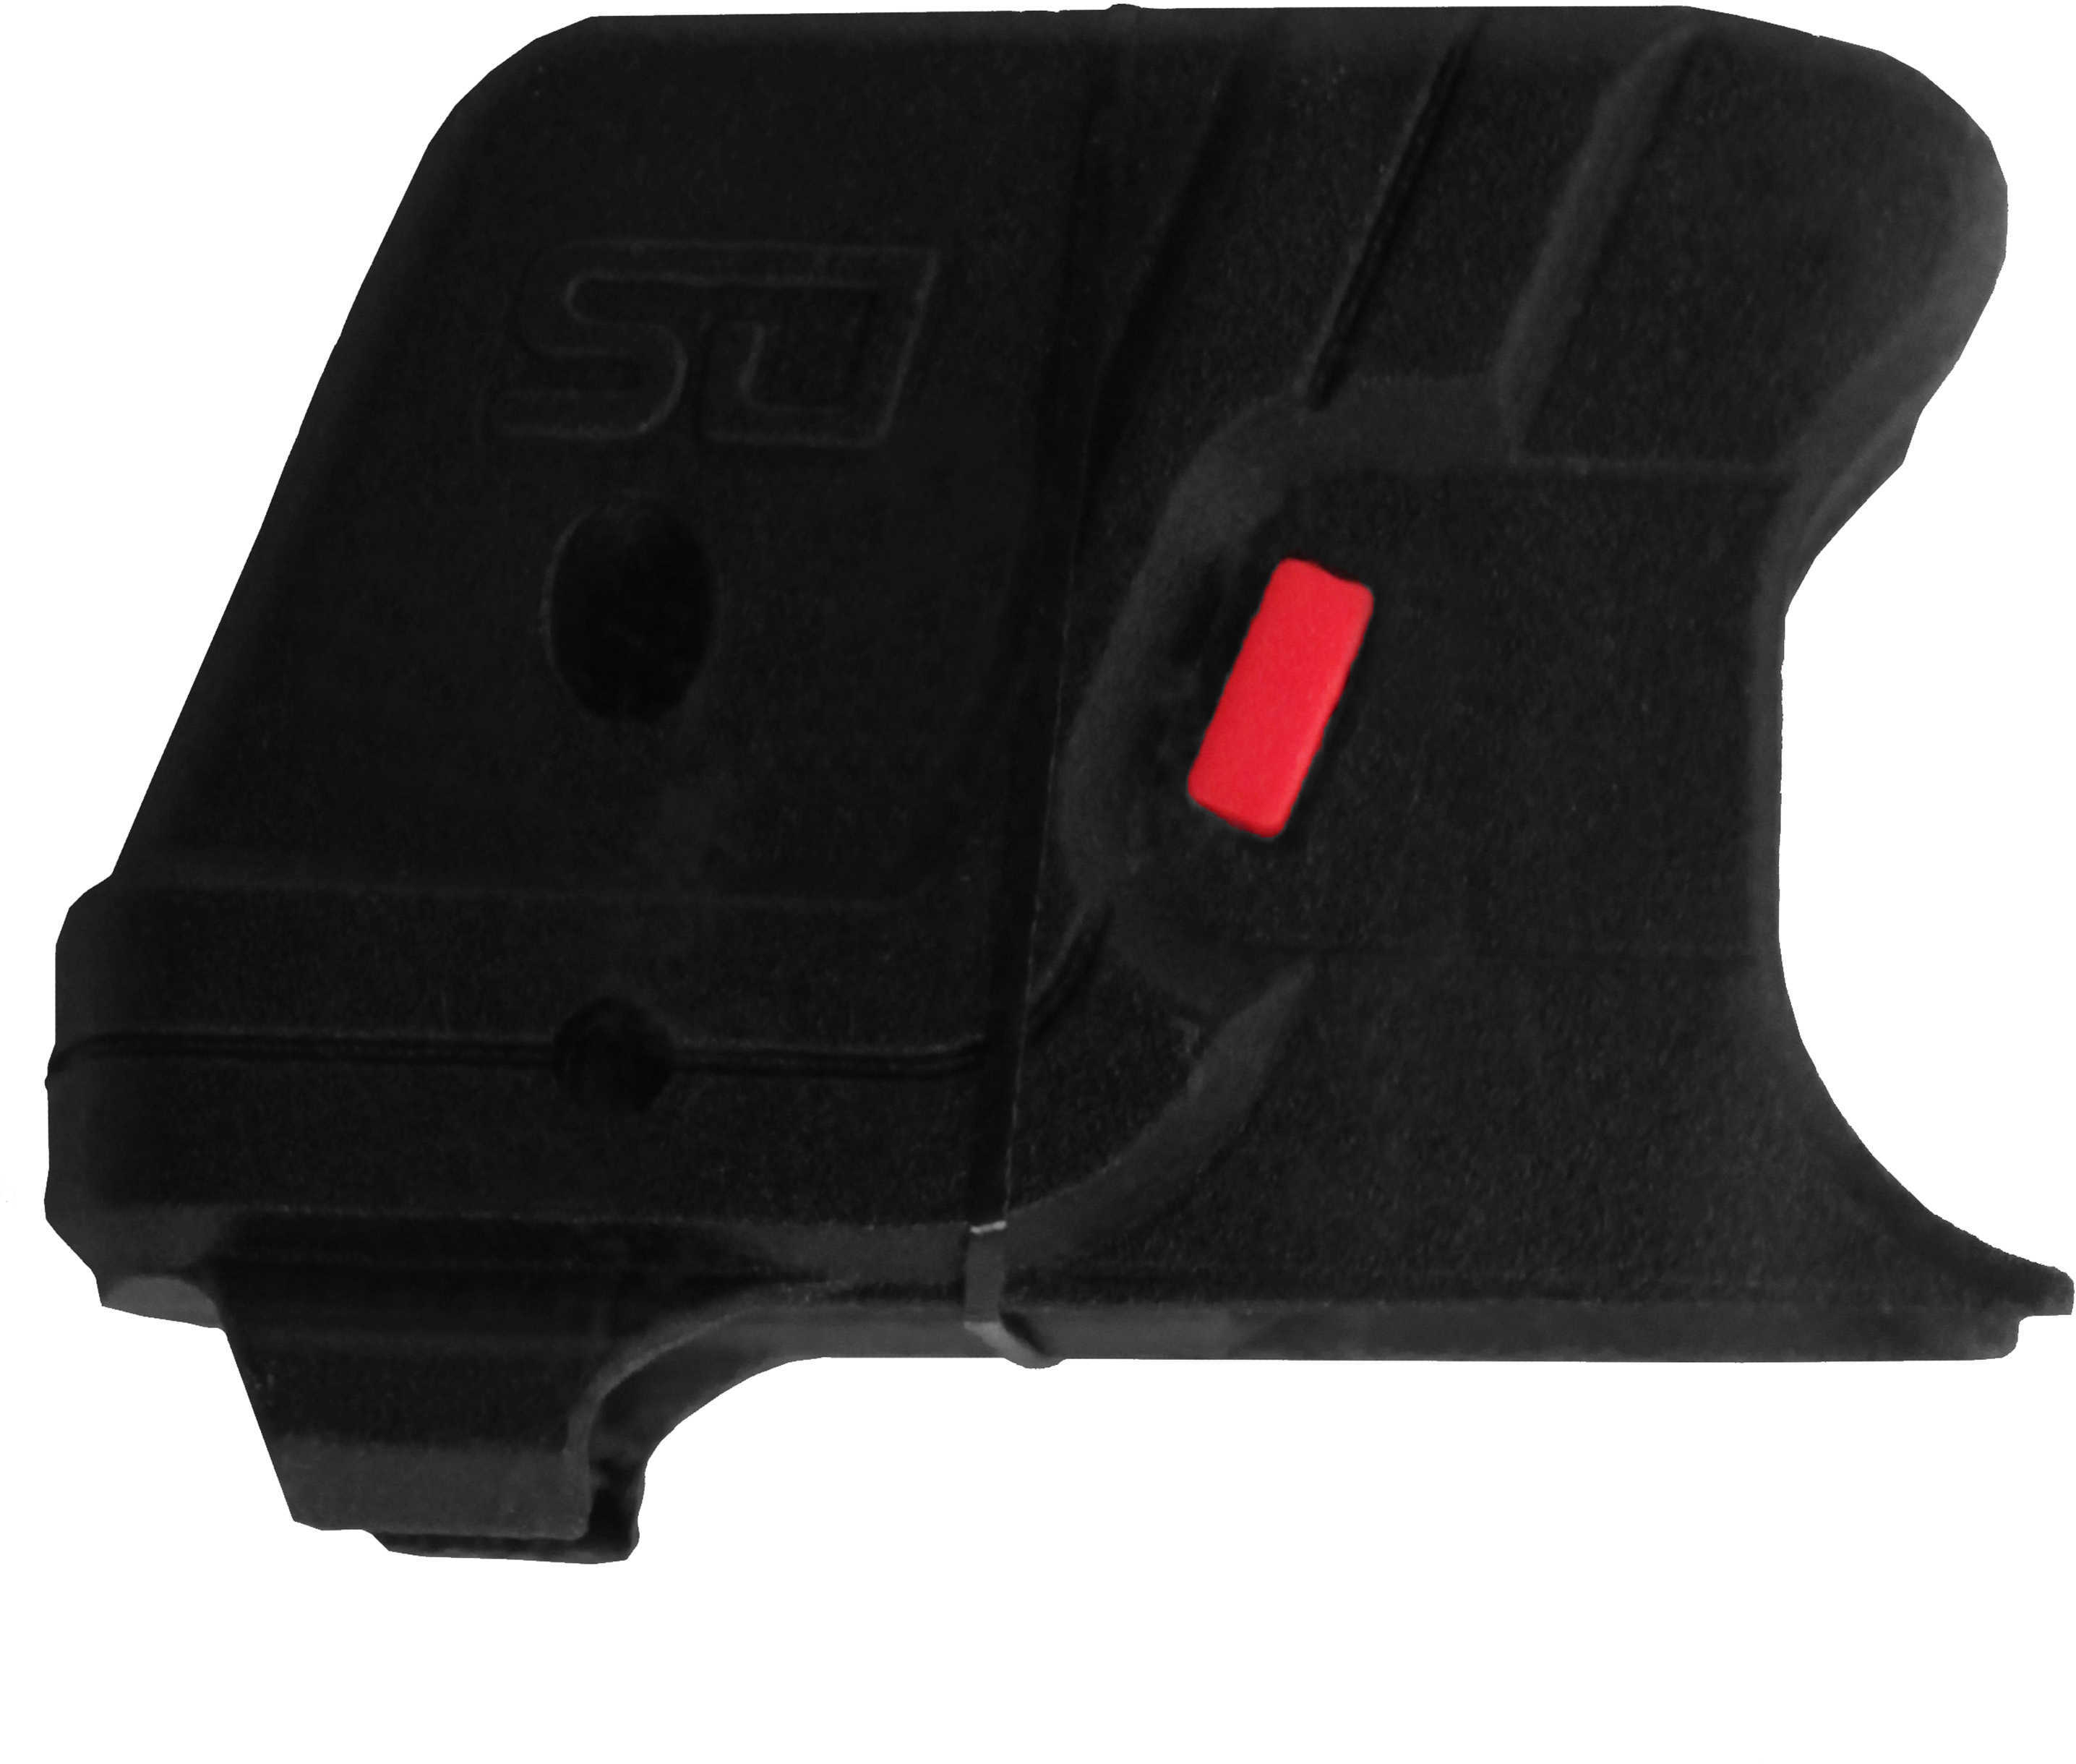 Defender Series for Glock AccuGuard Md: DS-121